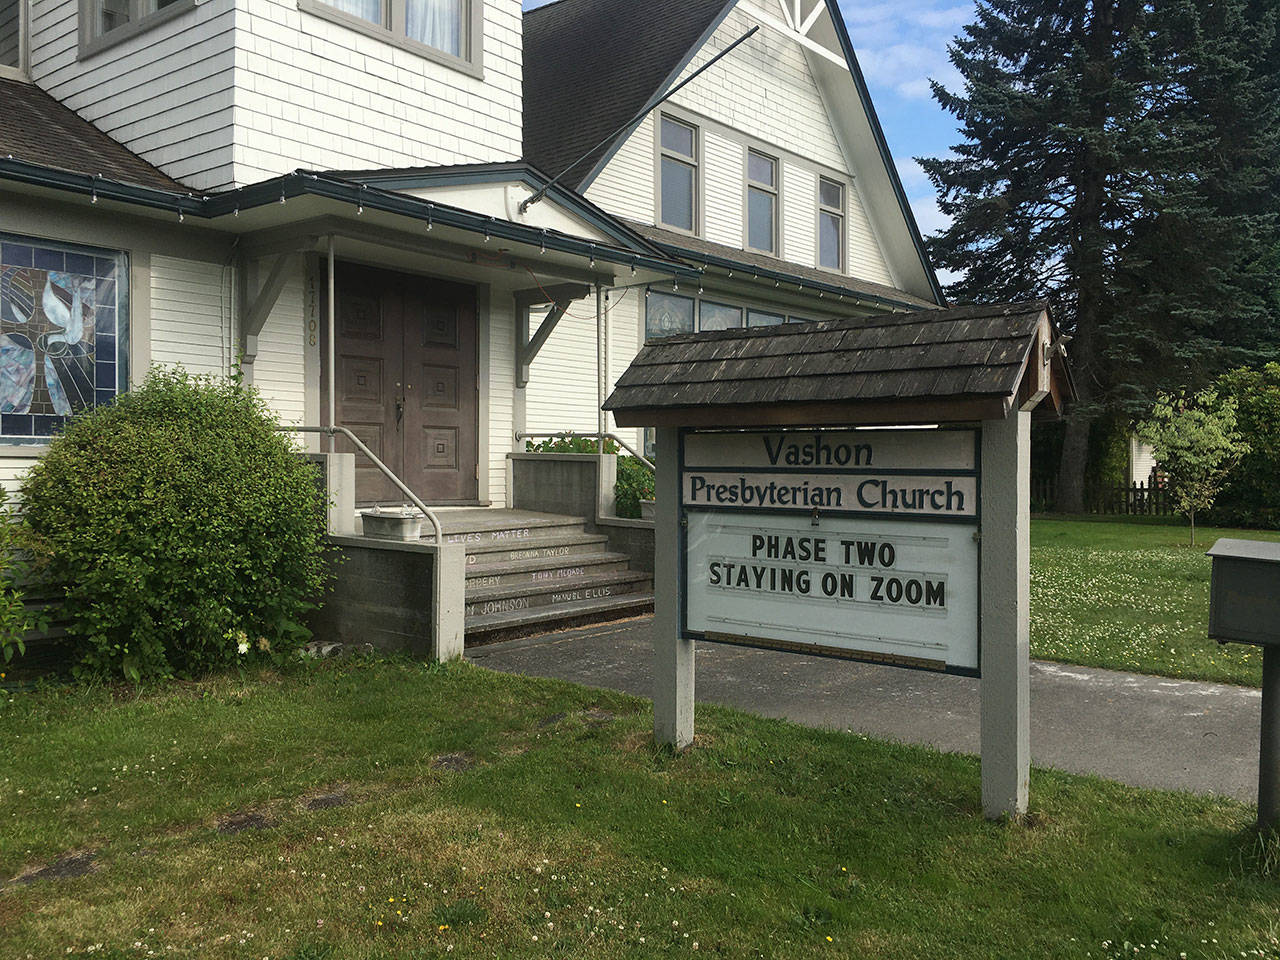 Vashon Presbyterian Church announces, on its signboard, that it will continue to present services online, rather than inviting its congregation back into its building (Elizabeth Shepherd Photo).